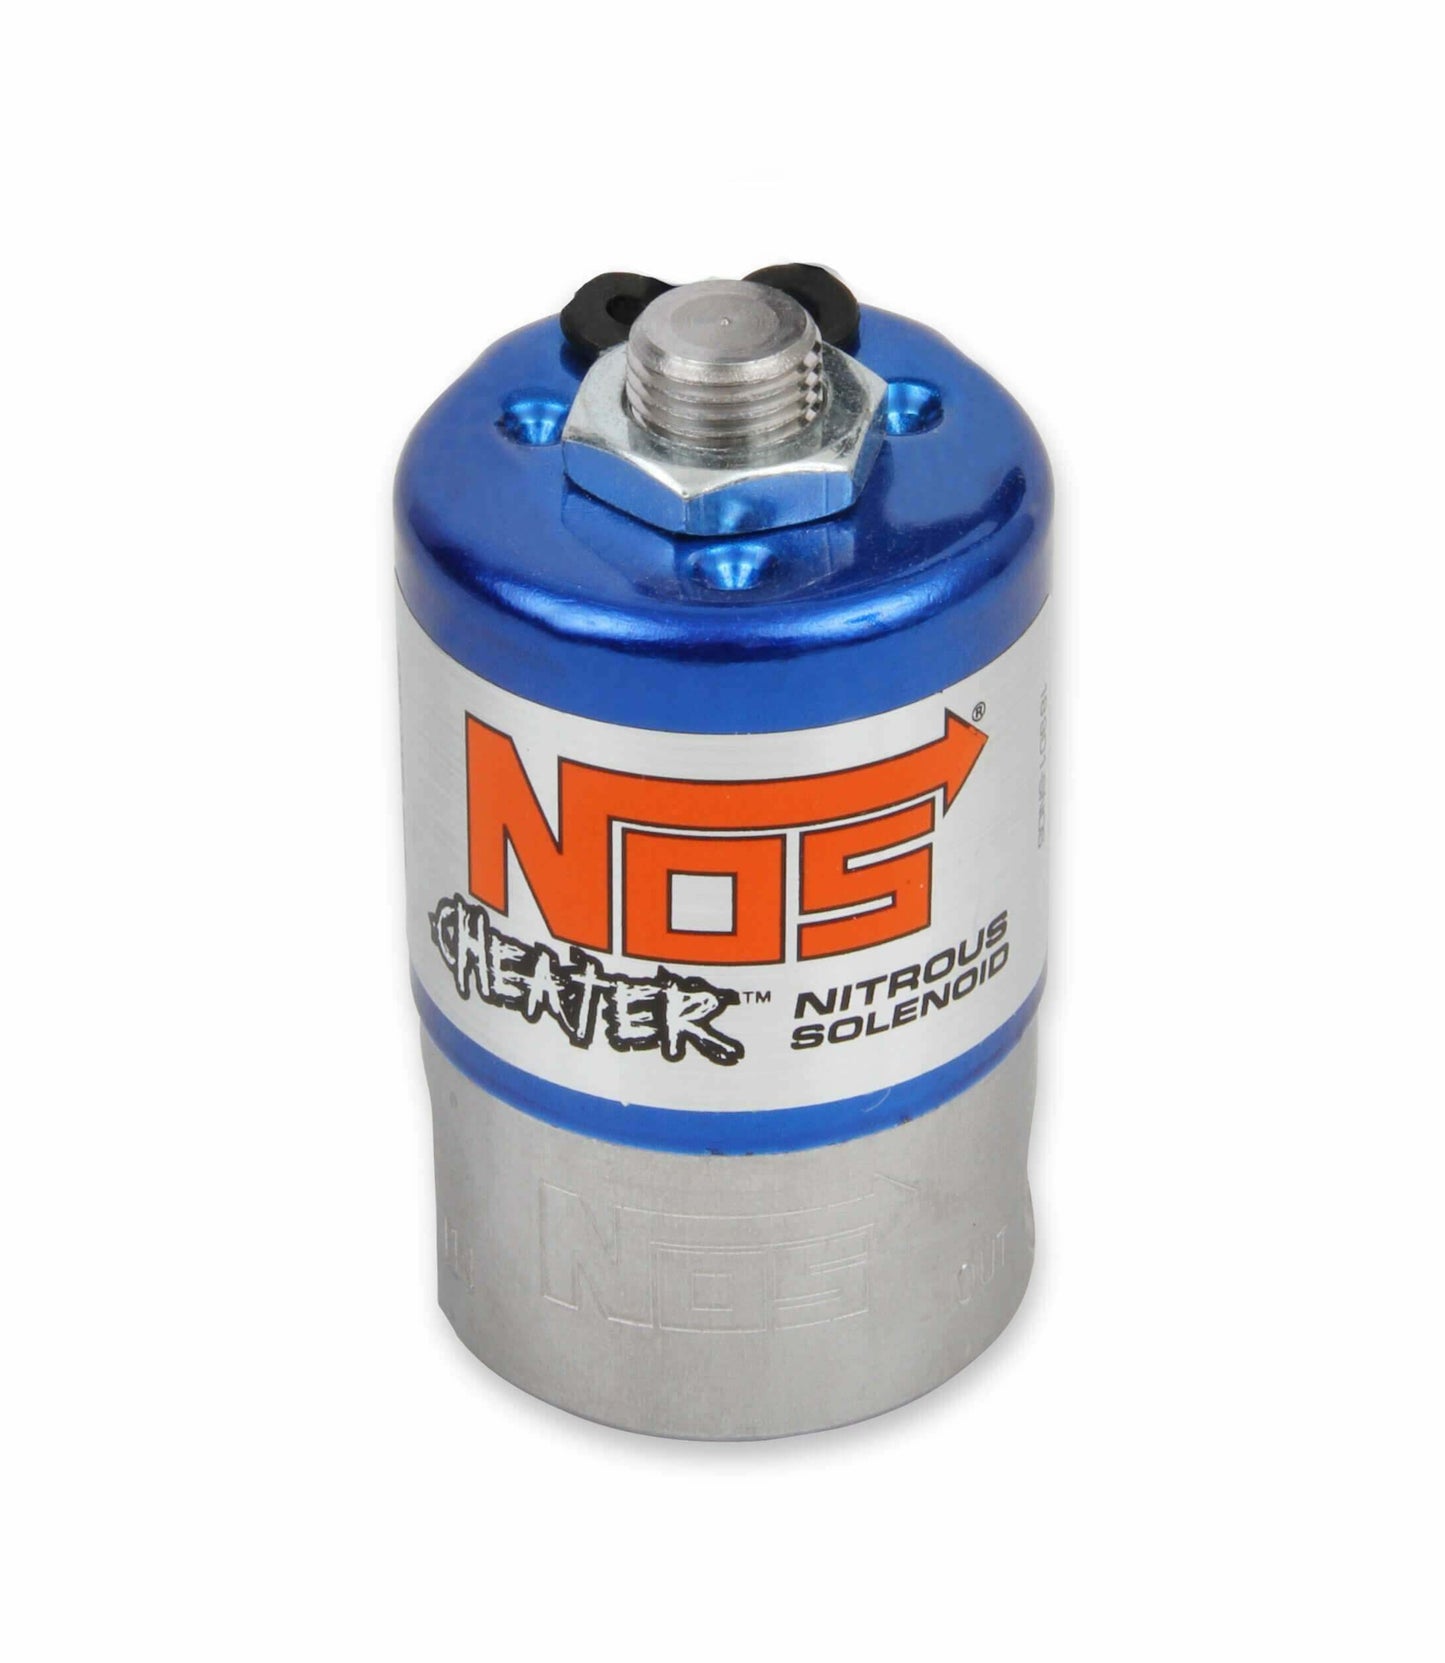 NOS 18000 Cheater Nitrous Solenoid Stainless Steel